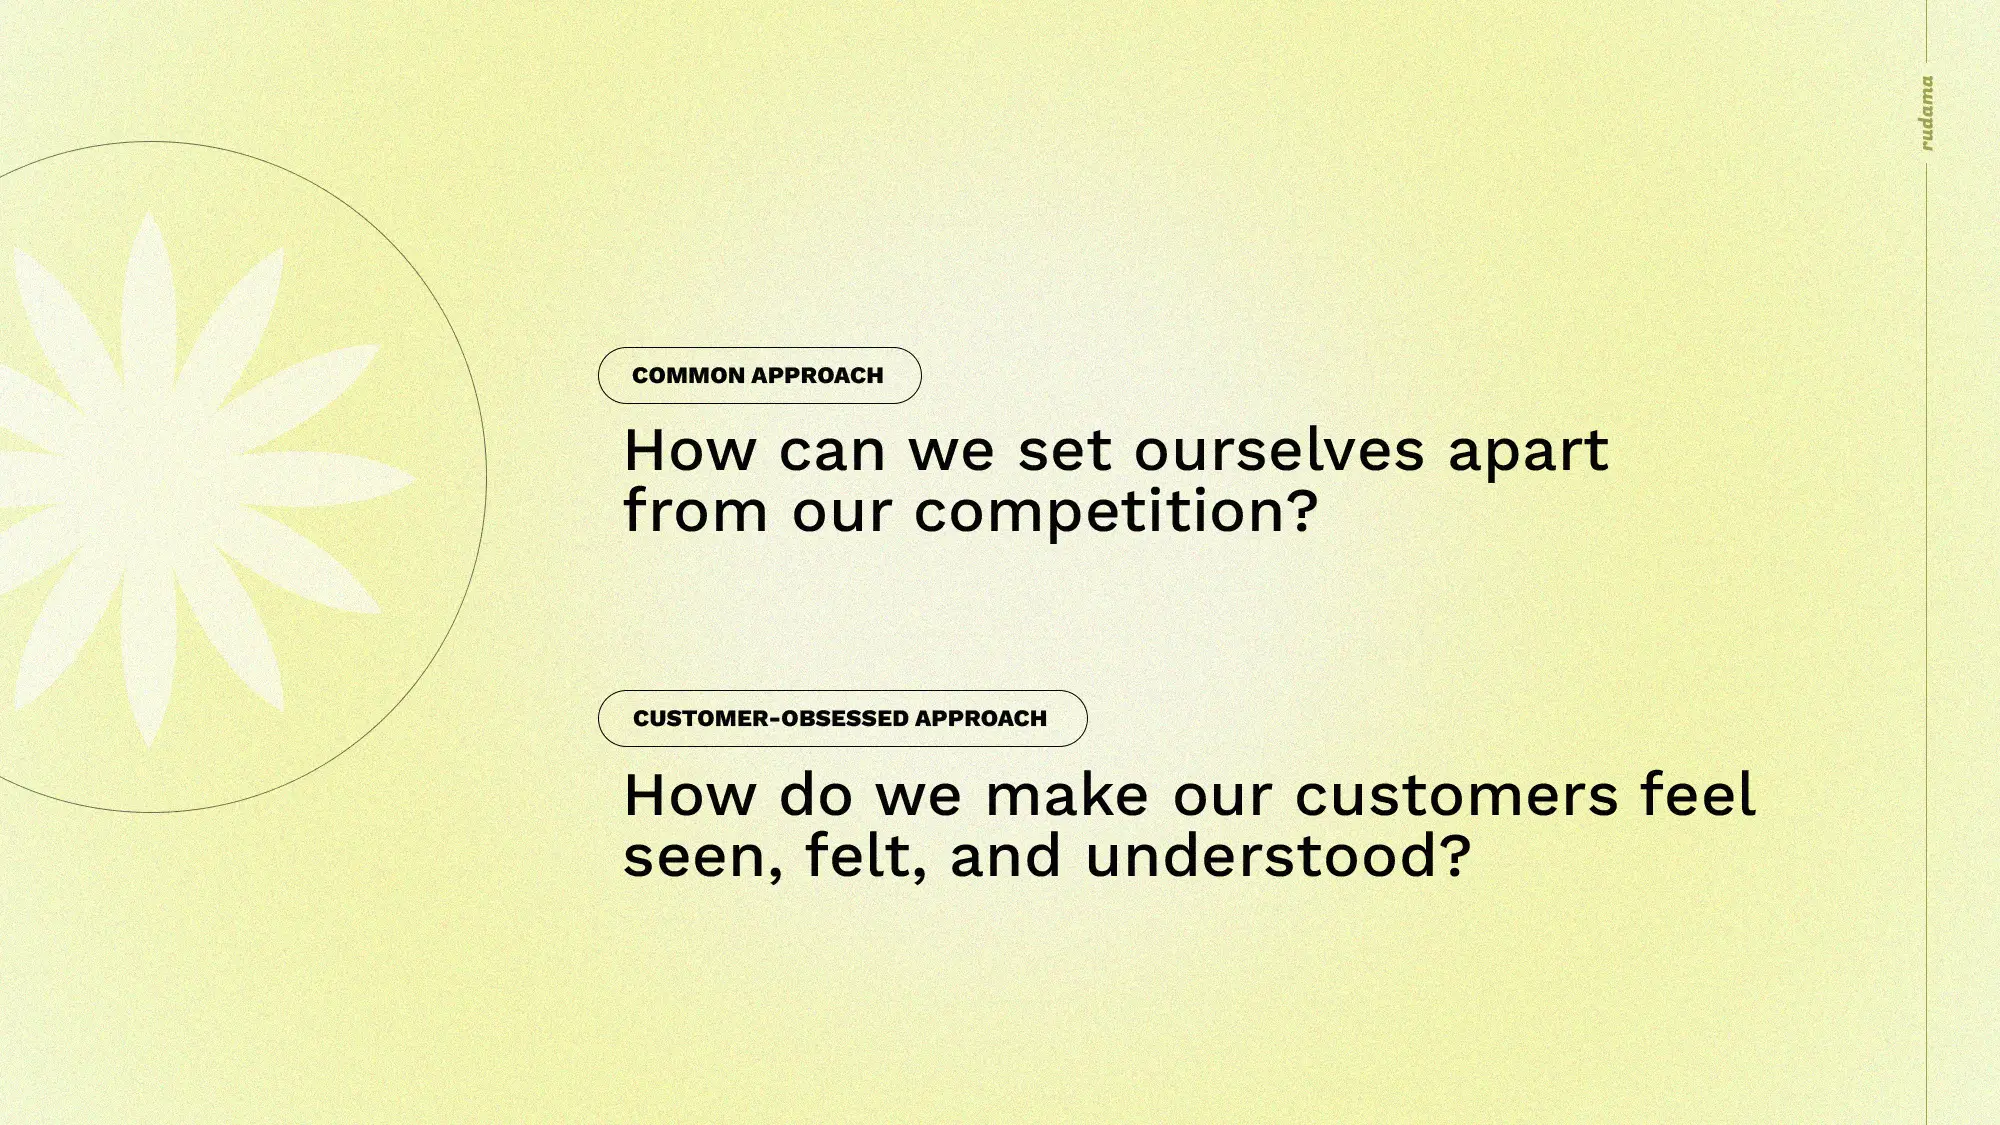 Ask how do we make our customers feel seen, felt, and understood instead